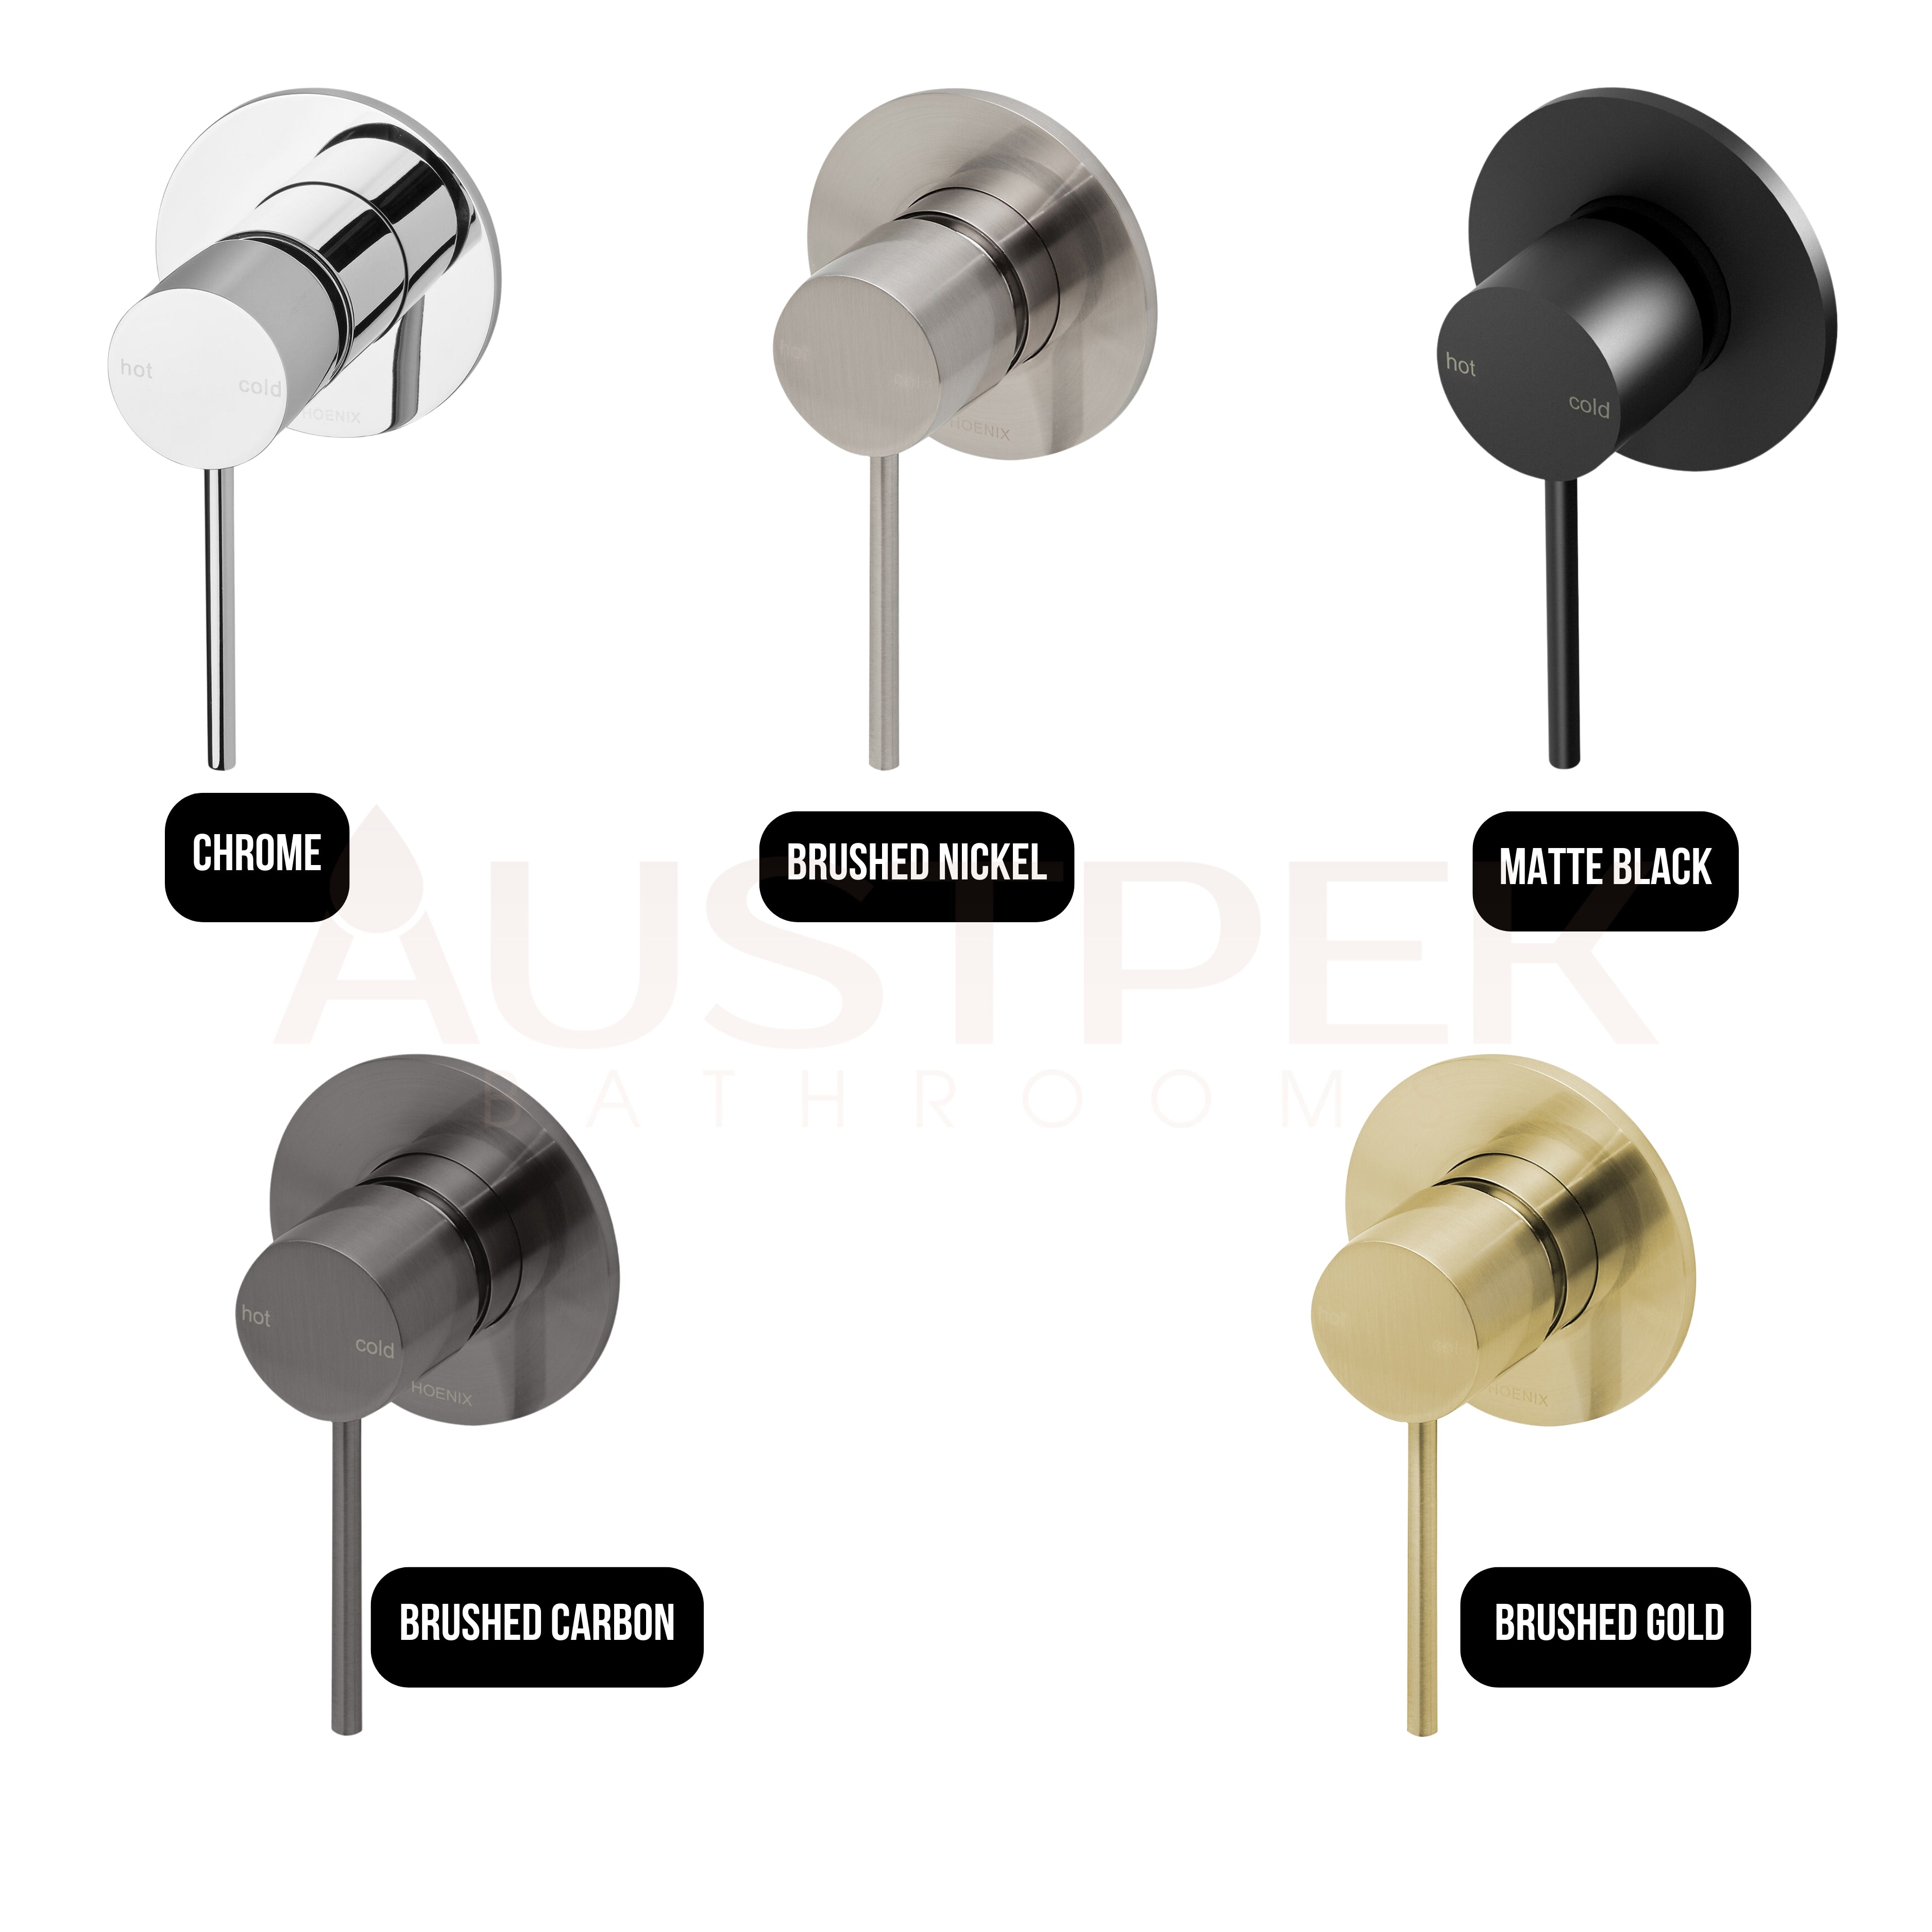 PHOENIX VIVID SLIMLINE SWITCHMIX SHOWER / WALL MIXER FIT-OFF AND ROUGH-IN KIT MATTE BLACK